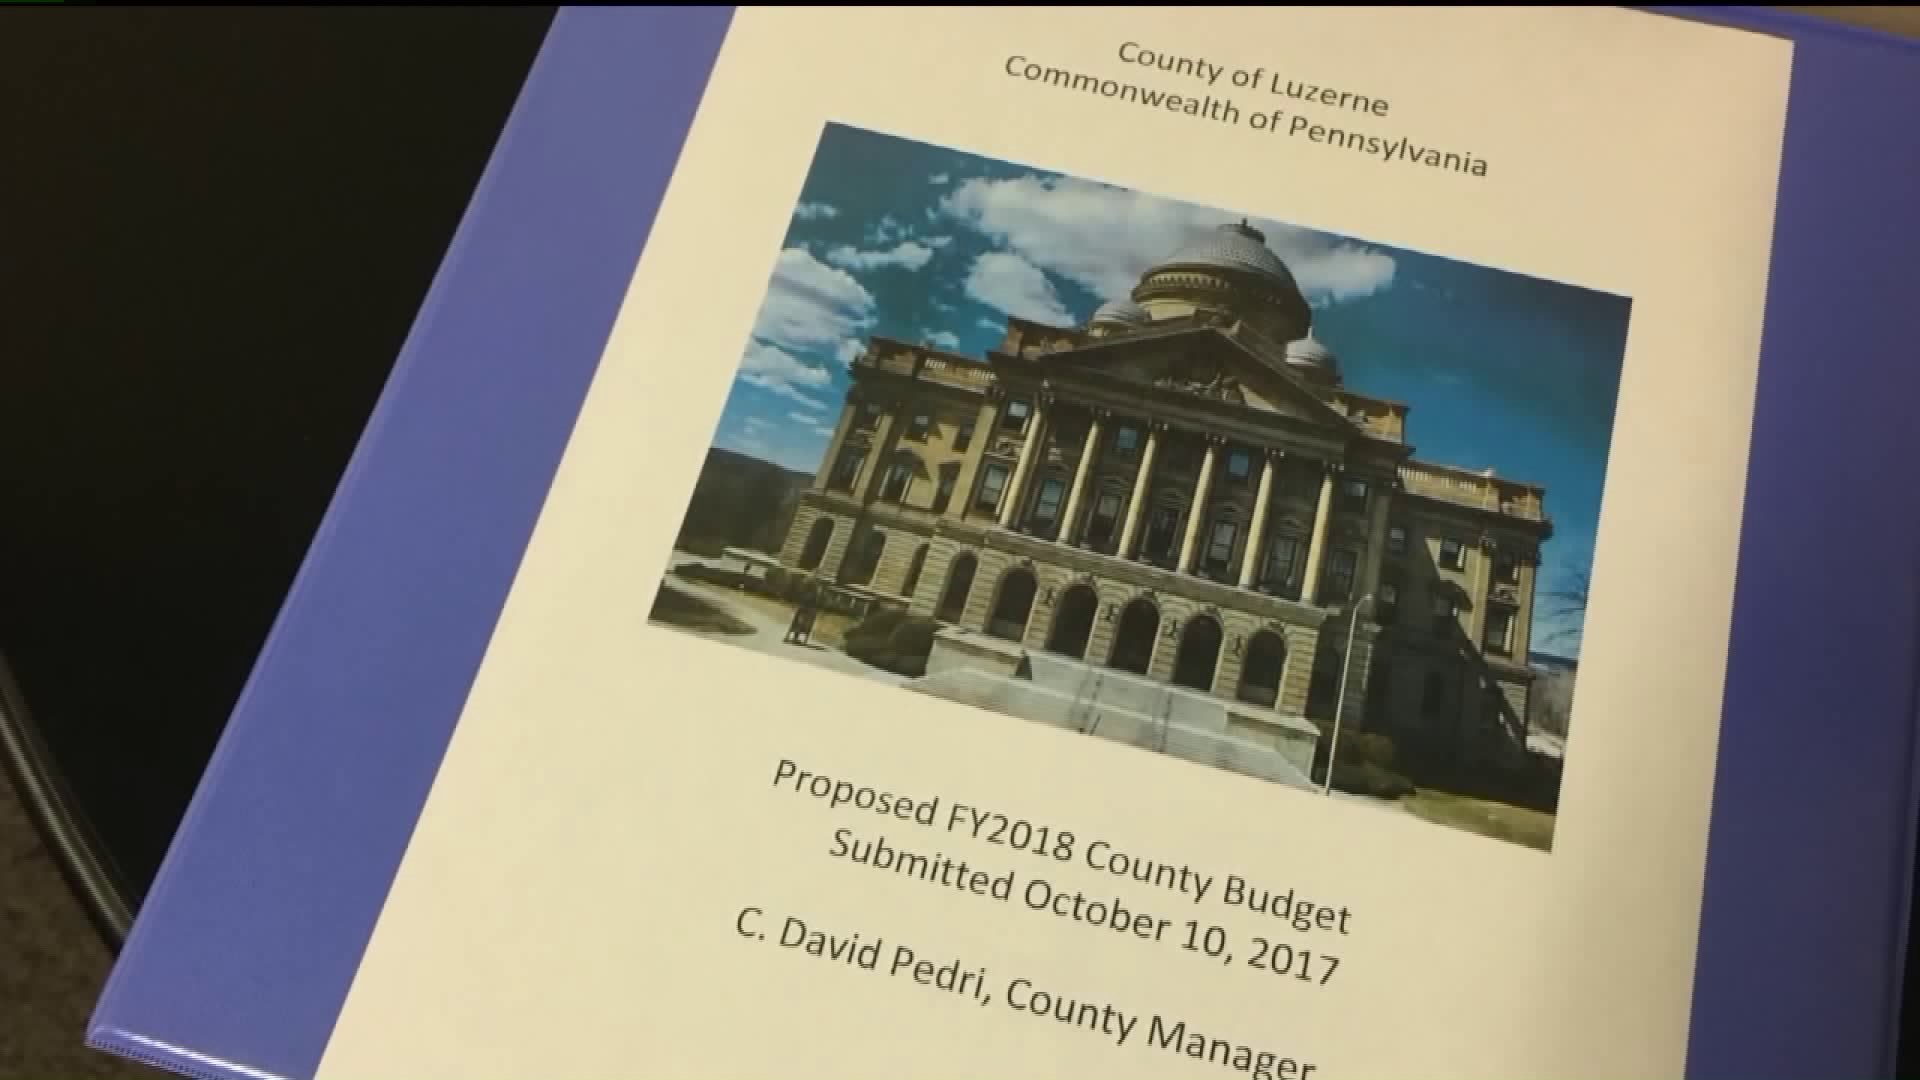 Money to Repave Long Overdue Road in Proposed Luzerne County Budget